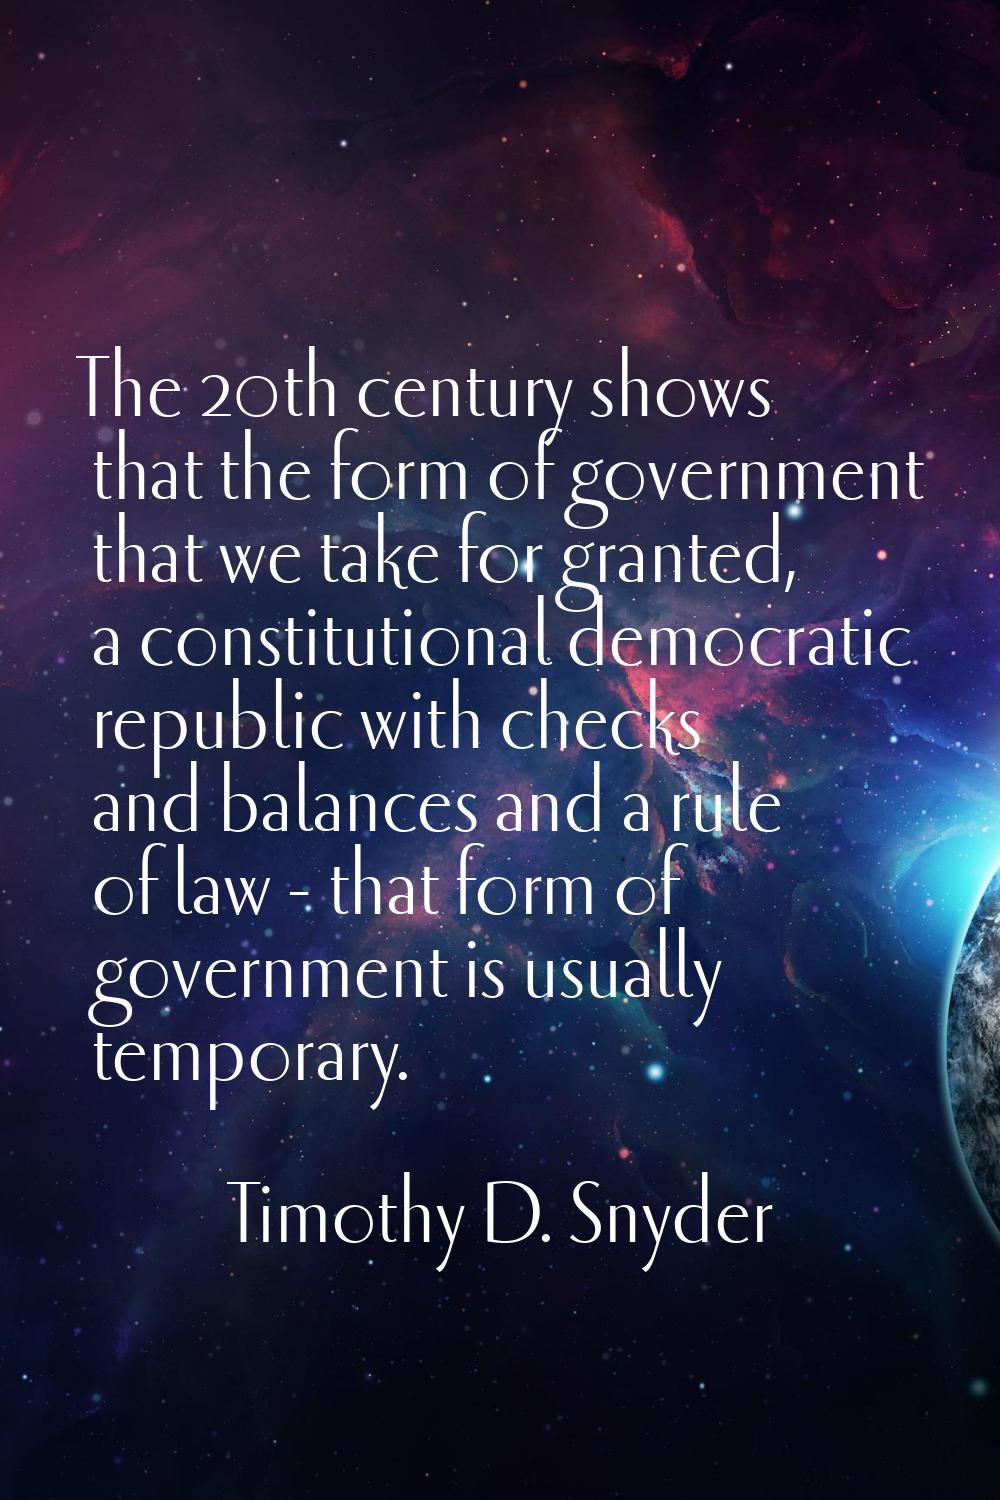 The 20th century shows that the form of government that we take for granted, a constitutional democ